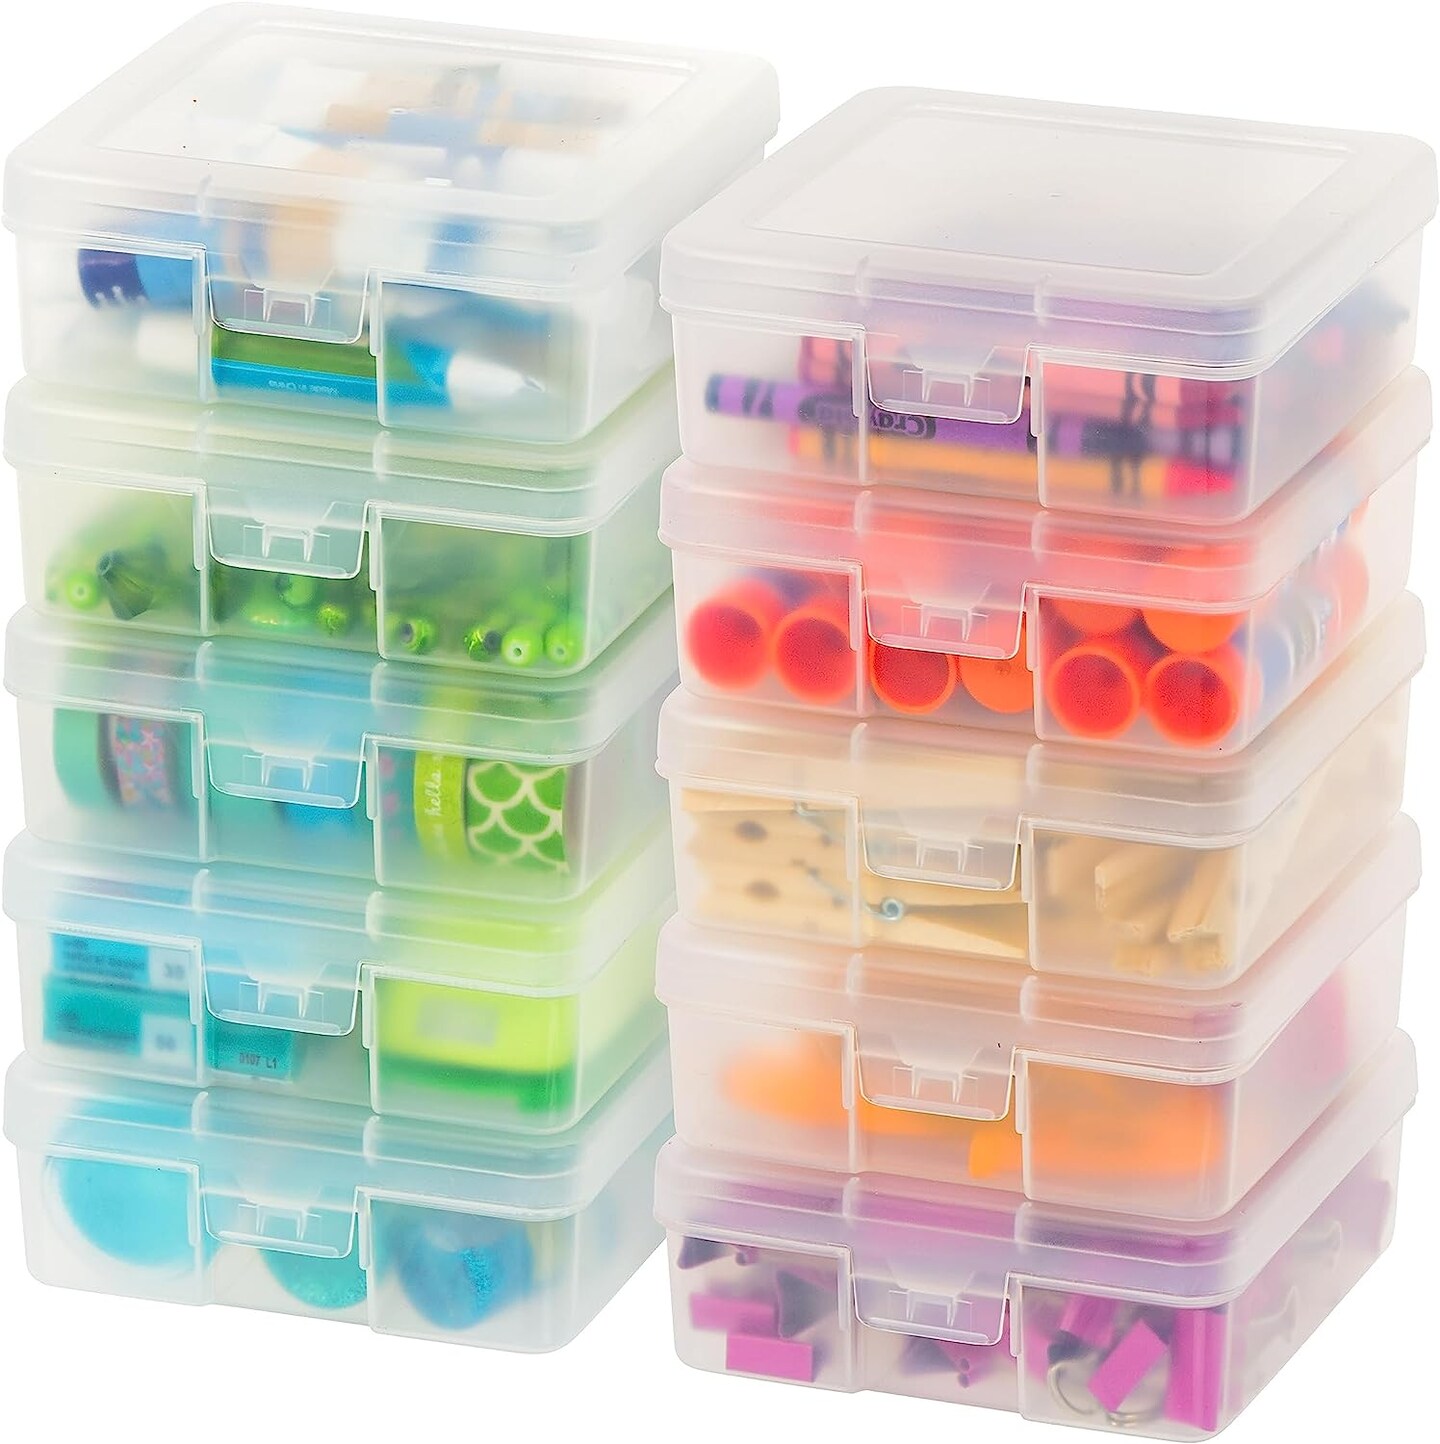  IRIS USA 10 Pack Medium Plastic Hobby Art Craft Supply Organizer  Storage Containers with Latching Lid, for Pens & Pencils, Ribbons, Wahi  Tape, Beads, Sticker, Yarn, Ornaments, Stackable, Clear : Patio